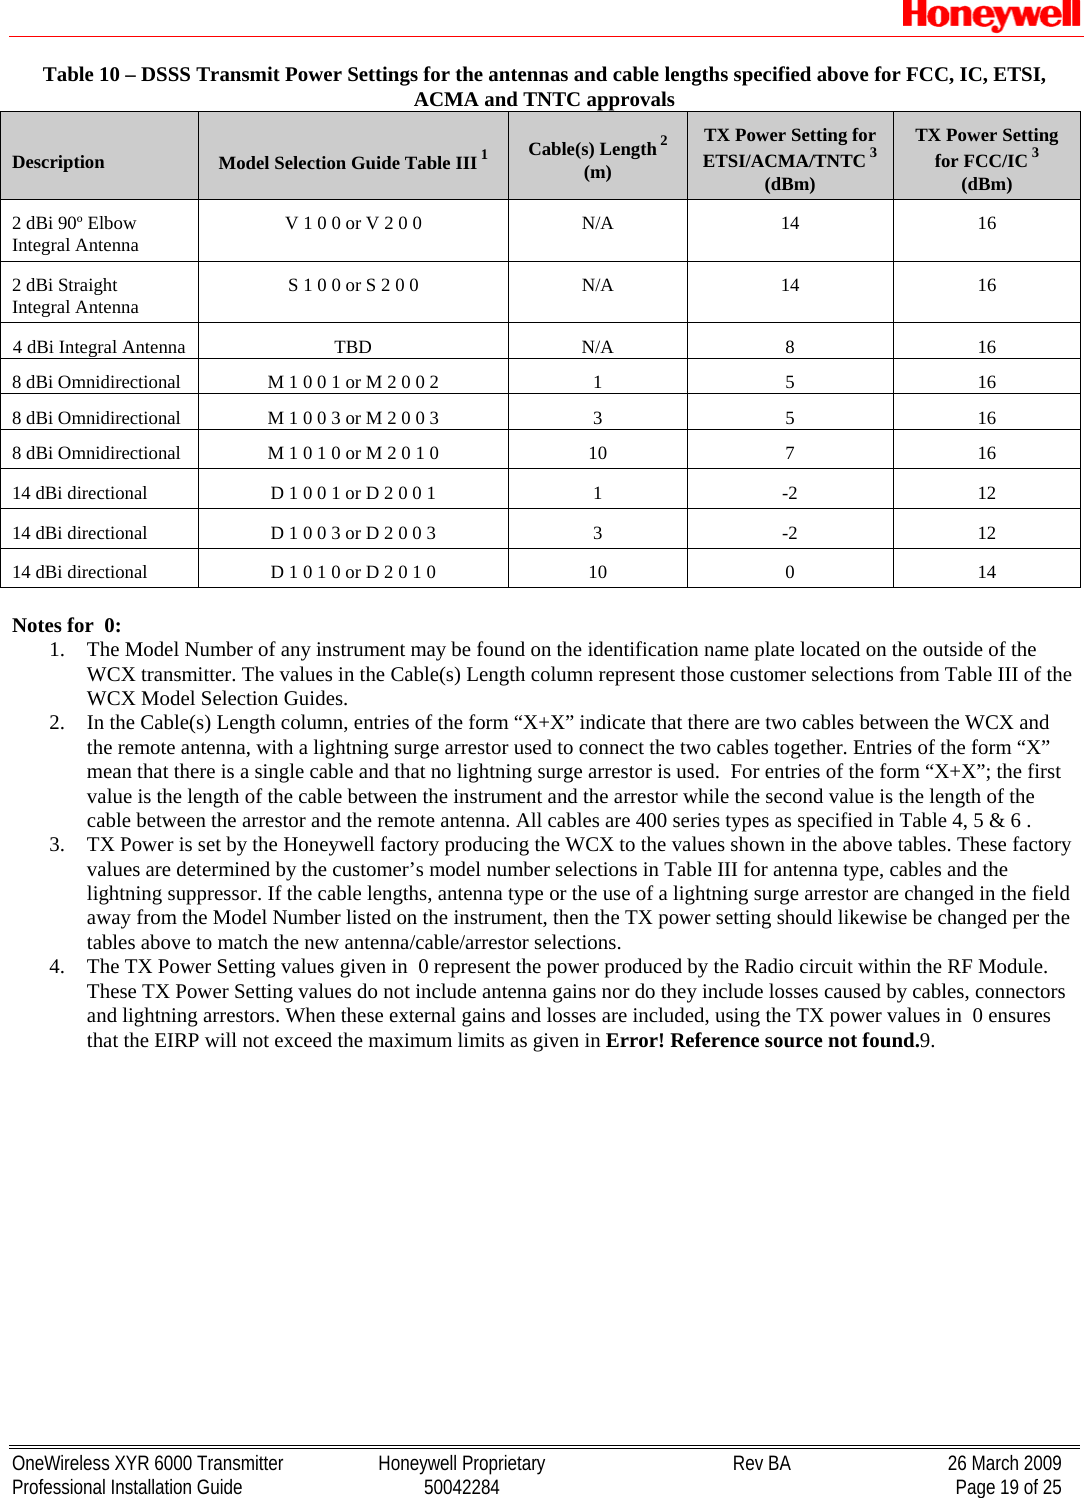   OneWireless XYR 6000 Transmitter  Honeywell Proprietary  Rev BA  26 March 2009 Professional Installation Guide  50042284    Page 19 of 25 Table 10 – DSSS Transmit Power Settings for the antennas and cable lengths specified above for FCC, IC, ETSI, ACMA and TNTC approvals Description  Model Selection Guide Table III 1 Cable(s) Length 2 (m) TX Power Setting for ETSI/ACMA/TNTC 3 (dBm) TX Power Setting for FCC/IC 3 (dBm) 2 dBi 90º Elbow Integral Antenna  V 1 0 0 or V 2 0 0  N/A  14  16 2 dBi Straight   Integral Antenna  S 1 0 0 or S 2 0 0  N/A  14  16 4 dBi Integral Antenna  TBD  N/A  8  16 8 dBi Omnidirectional   M 1 0 0 1 or M 2 0 0 2  1  5  16 8 dBi Omnidirectional   M 1 0 0 3 or M 2 0 0 3  3  5  16 8 dBi Omnidirectional   M 1 0 1 0 or M 2 0 1 0  10  7  16 14 dBi directional   D 1 0 0 1 or D 2 0 0 1  1  -2  12 14 dBi directional  D 1 0 0 3 or D 2 0 0 3  3  -2  12 14 dBi directional   D 1 0 1 0 or D 2 0 1 0  10  0  14  Notes for  0: 1. The Model Number of any instrument may be found on the identification name plate located on the outside of the WCX transmitter. The values in the Cable(s) Length column represent those customer selections from Table III of the WCX Model Selection Guides. 2. In the Cable(s) Length column, entries of the form “X+X” indicate that there are two cables between the WCX and the remote antenna, with a lightning surge arrestor used to connect the two cables together. Entries of the form “X” mean that there is a single cable and that no lightning surge arrestor is used.  For entries of the form “X+X”; the first value is the length of the cable between the instrument and the arrestor while the second value is the length of the cable between the arrestor and the remote antenna. All cables are 400 series types as specified in Table 4, 5 &amp; 6 . 3. TX Power is set by the Honeywell factory producing the WCX to the values shown in the above tables. These factory values are determined by the customer’s model number selections in Table III for antenna type, cables and the lightning suppressor. If the cable lengths, antenna type or the use of a lightning surge arrestor are changed in the field away from the Model Number listed on the instrument, then the TX power setting should likewise be changed per the tables above to match the new antenna/cable/arrestor selections. 4. The TX Power Setting values given in  0 represent the power produced by the Radio circuit within the RF Module. These TX Power Setting values do not include antenna gains nor do they include losses caused by cables, connectors and lightning arrestors. When these external gains and losses are included, using the TX power values in  0 ensures that the EIRP will not exceed the maximum limits as given in Error! Reference source not found.9. 